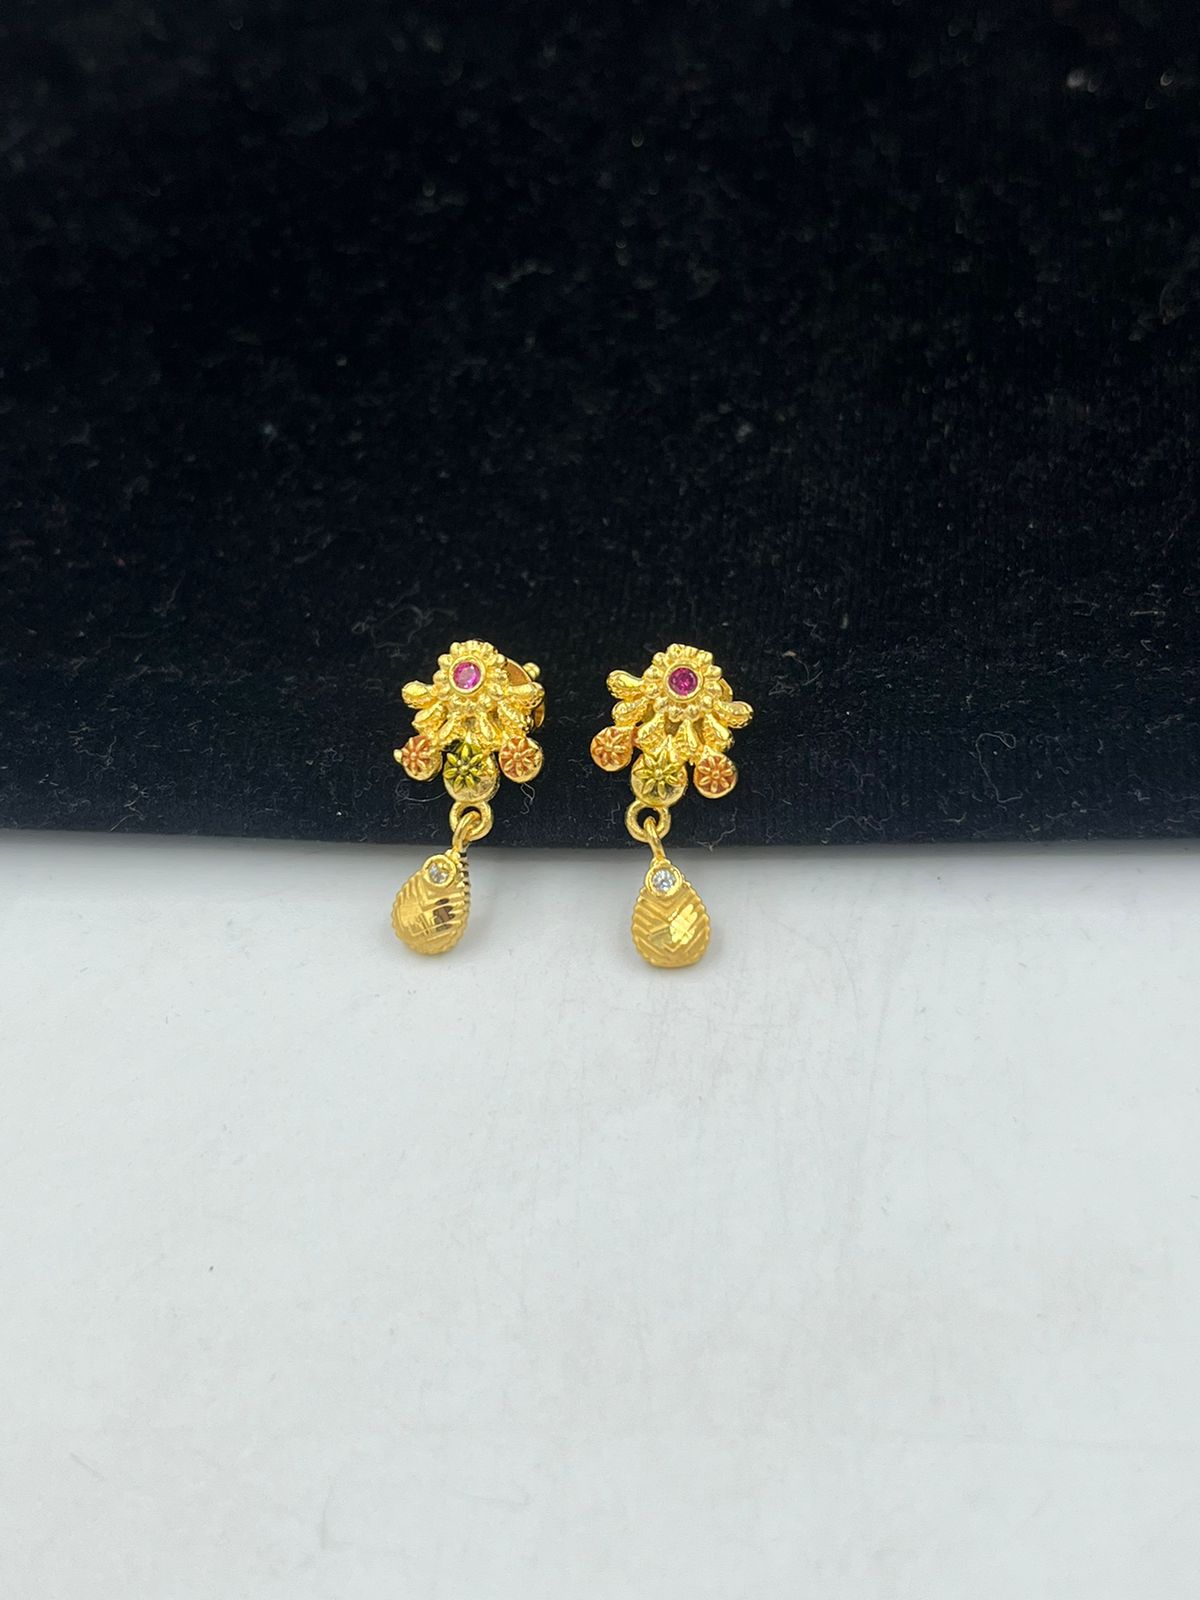 Aggregate more than 205 12 grams gold earrings best